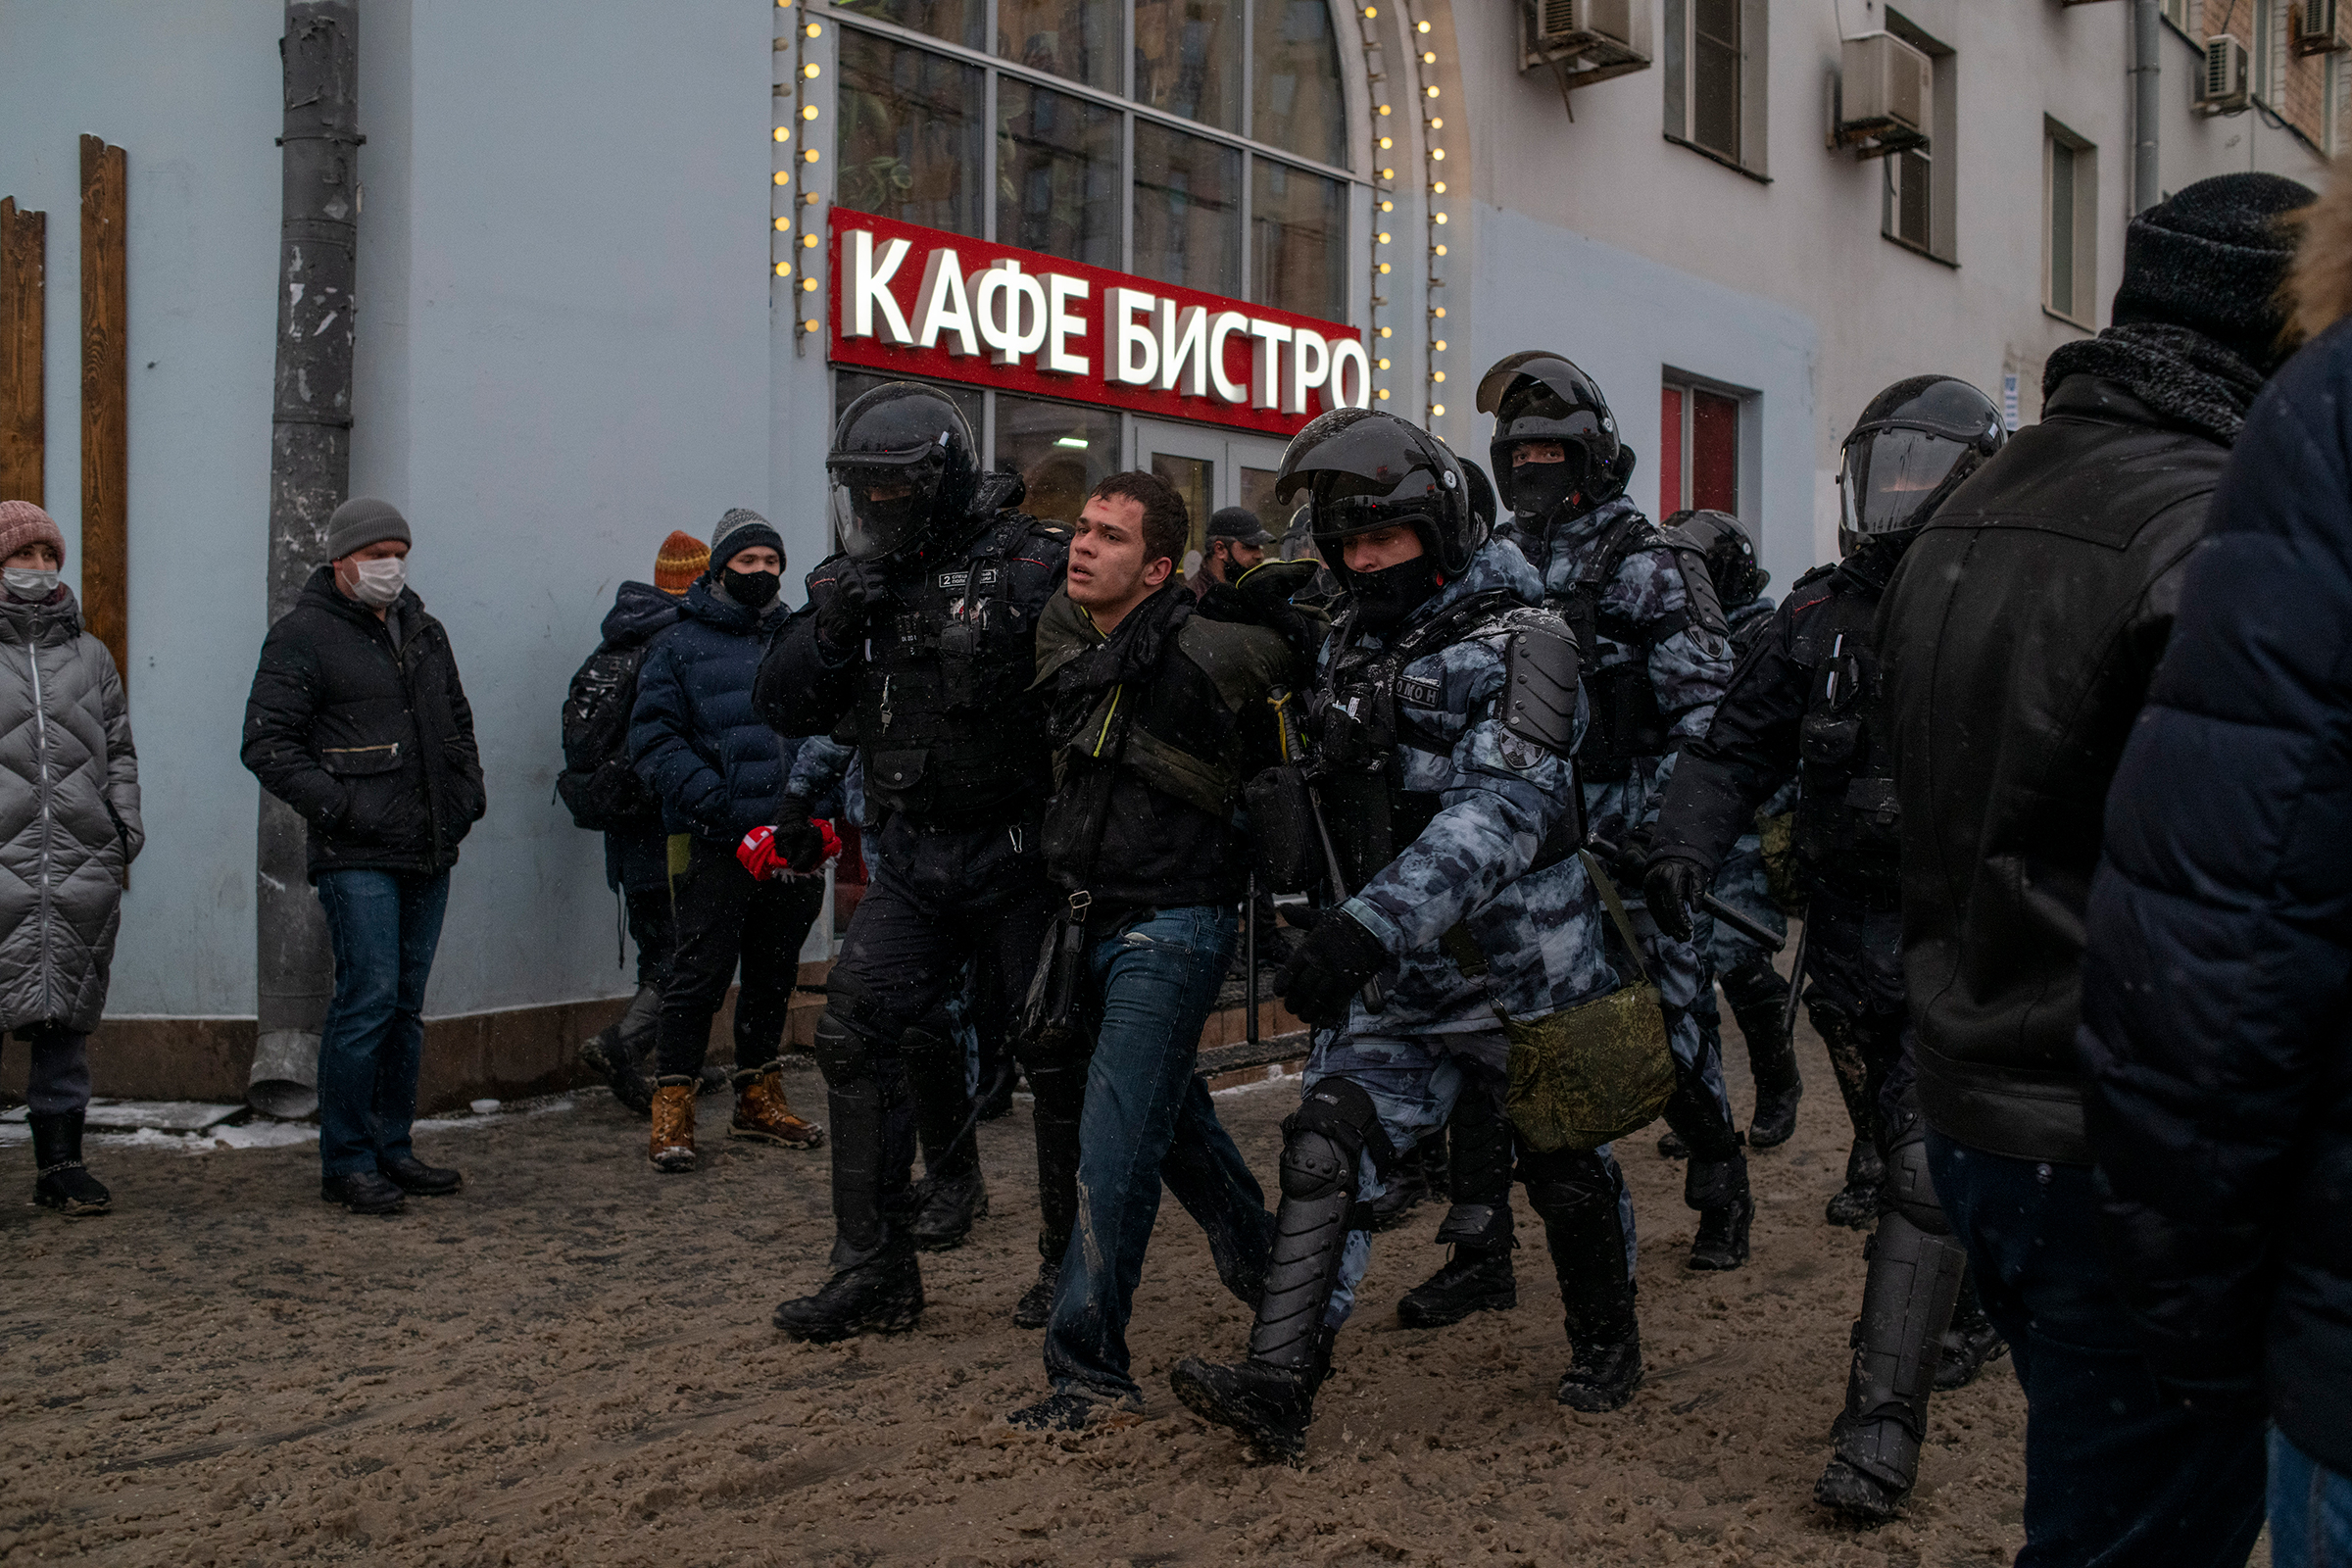 A protester is detained in Moscow on Jan. 31.